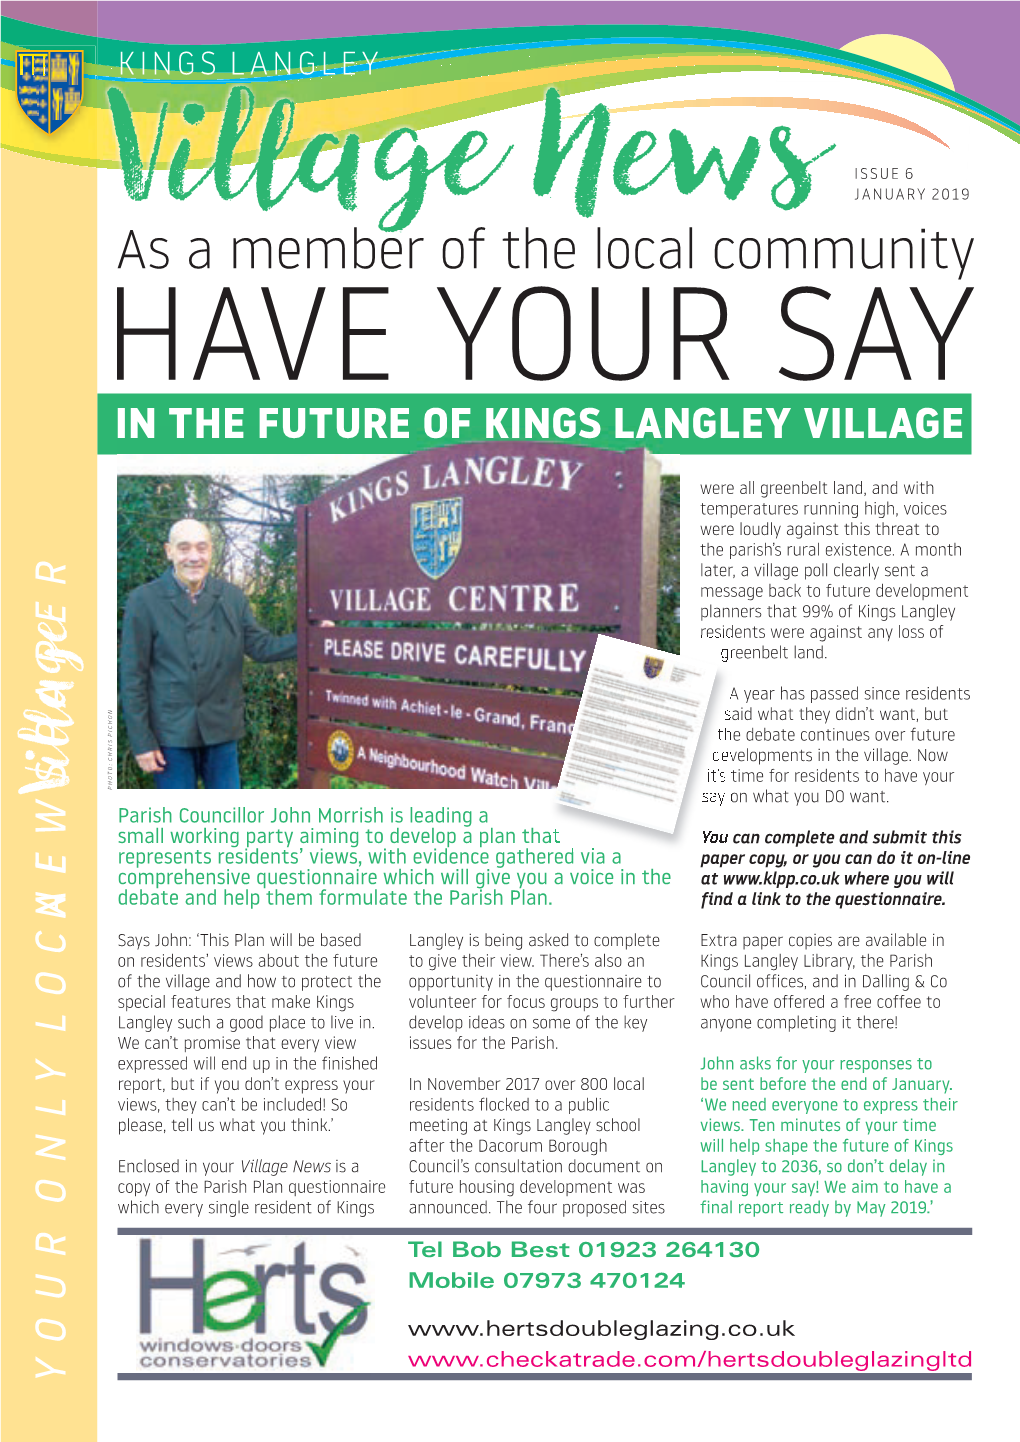 As a Member of the Local Community HAVE YOUR SAY in the FUTURE of KINGS LANGLEY VILLAGE